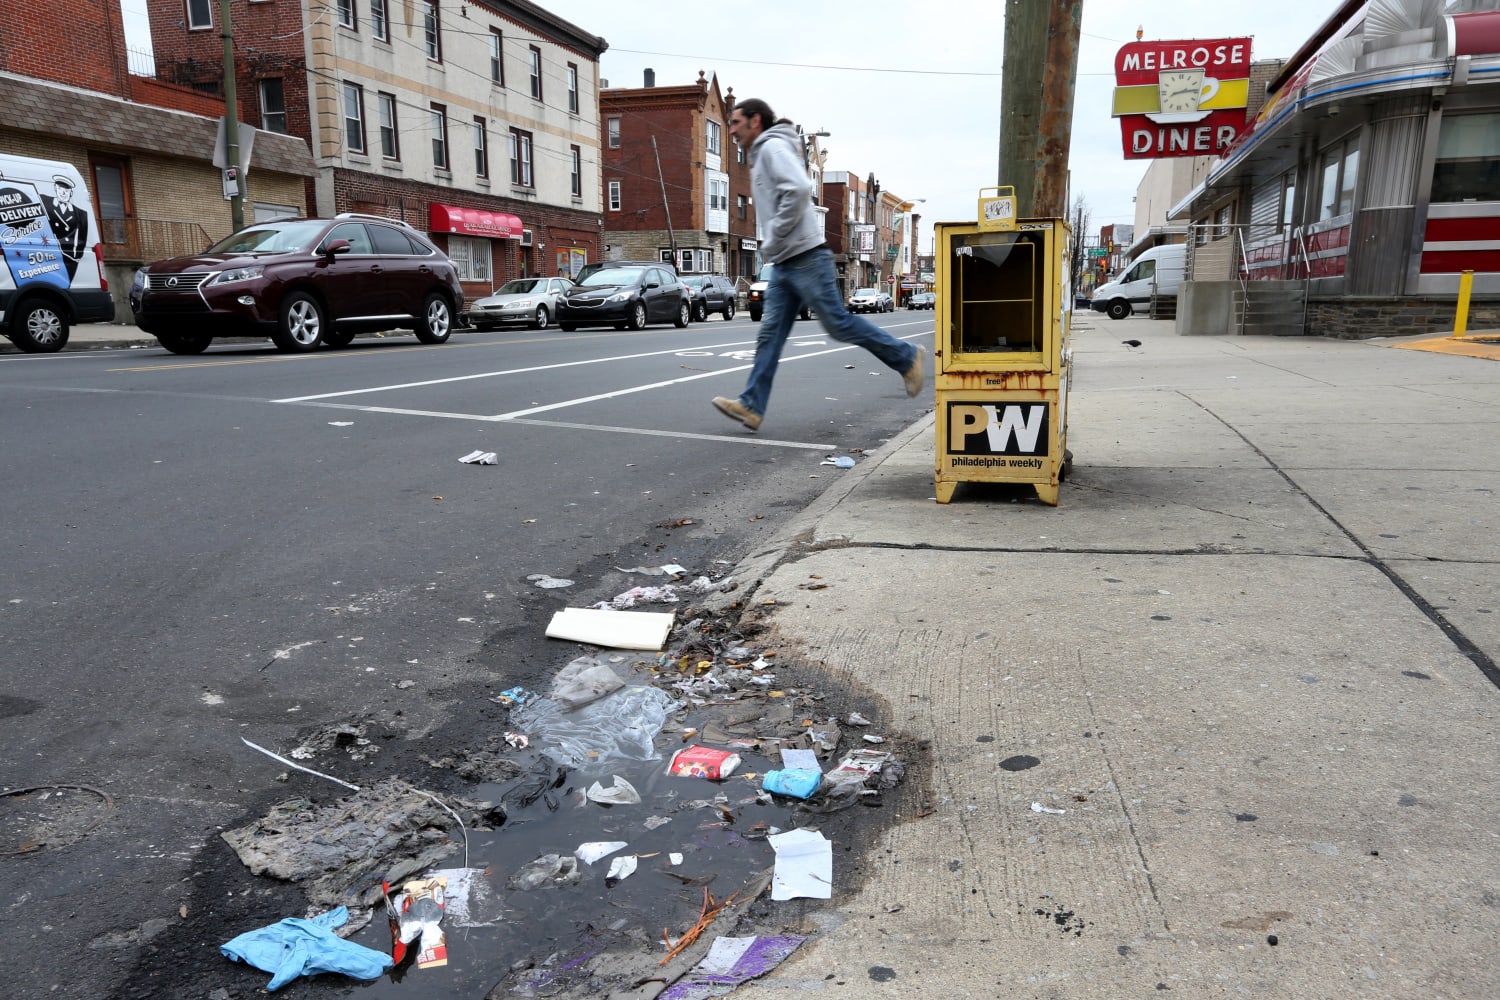 Philly sanitation workers blame filthy streets on city 'management